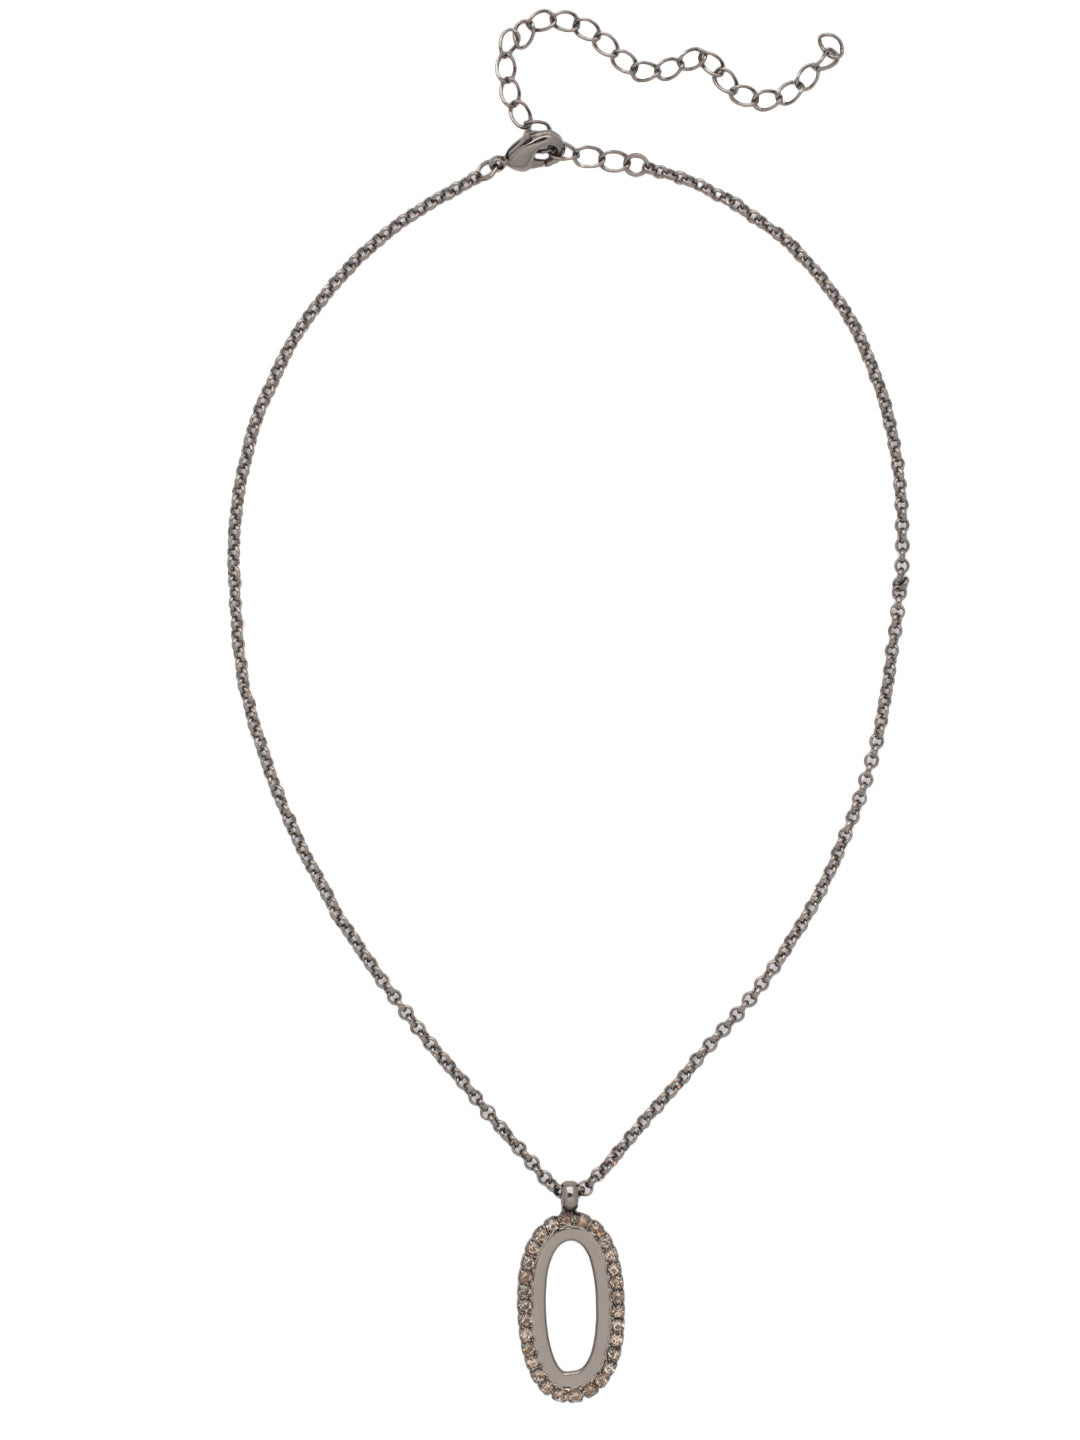 Tori Pendant Necklace - NFL3GMBD - <p>The Tori Pendant Necklace features a single rhinestone embellished chain link on an adjustable chain, secured with a lobster claw clasp. From Sorrelli's Black Diamond collection in our Gun Metal finish.</p>